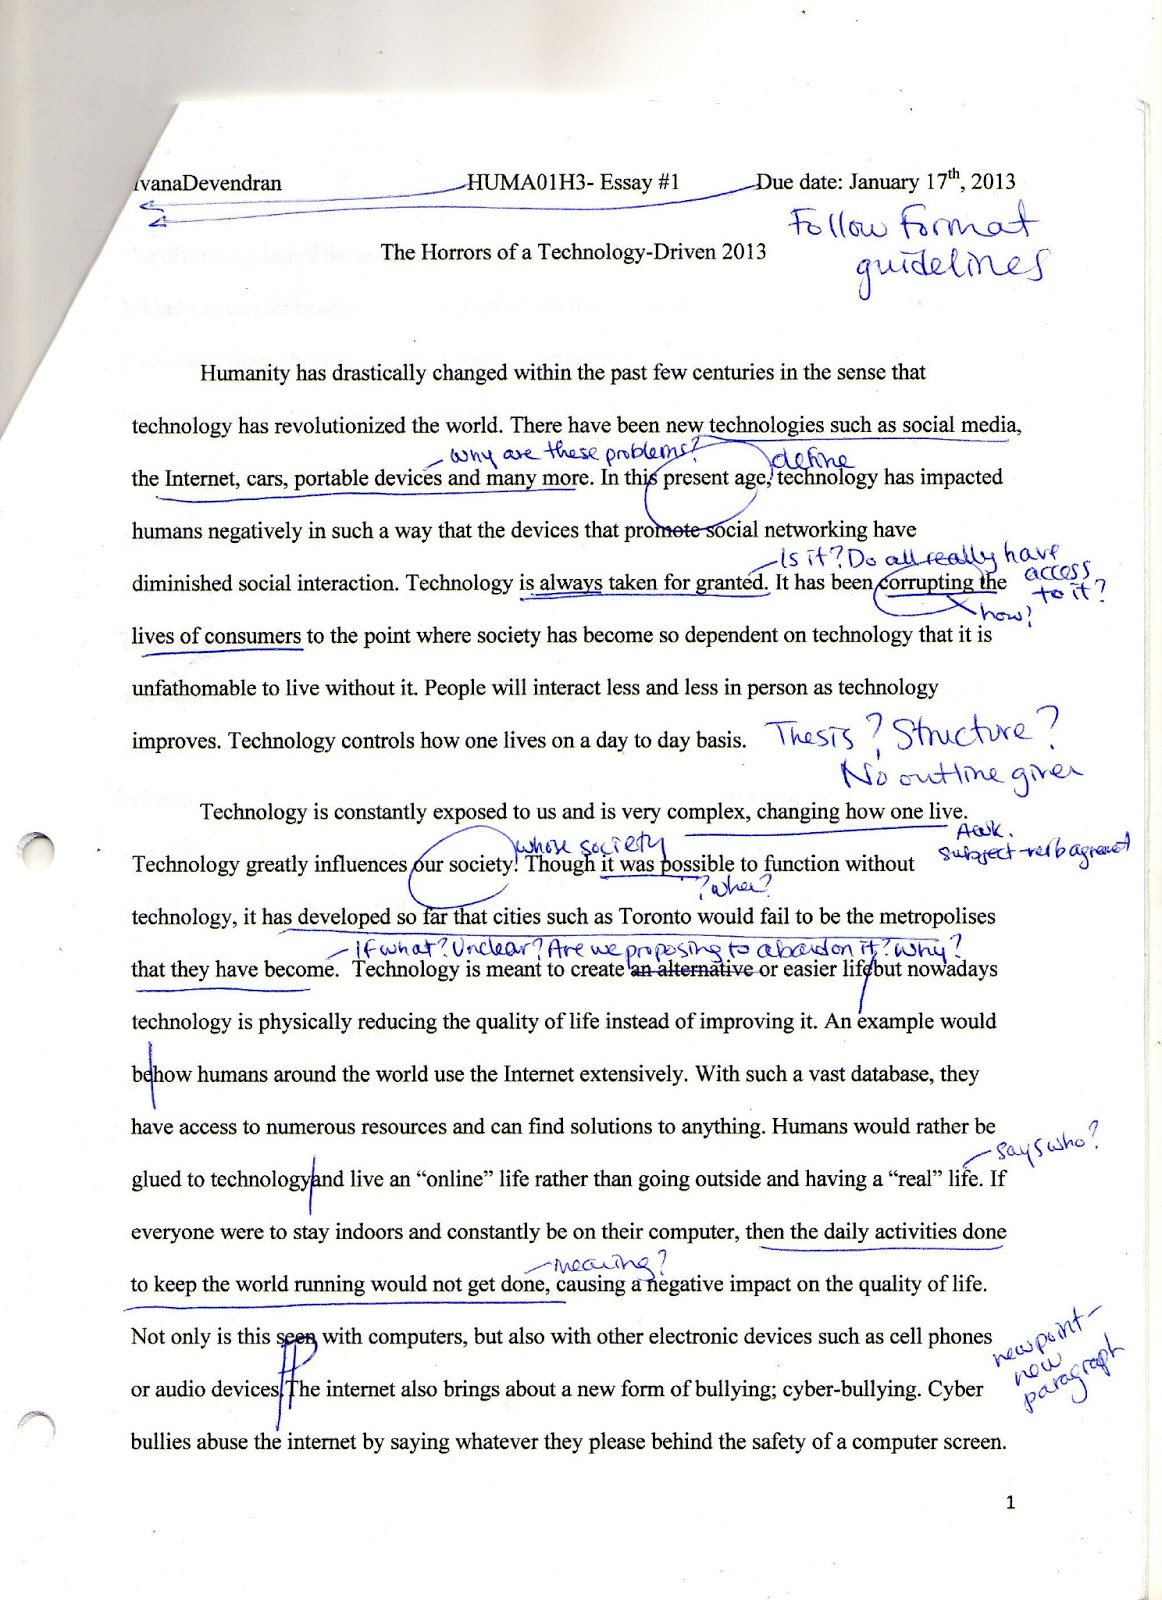 How to write an analytical essay about a short story